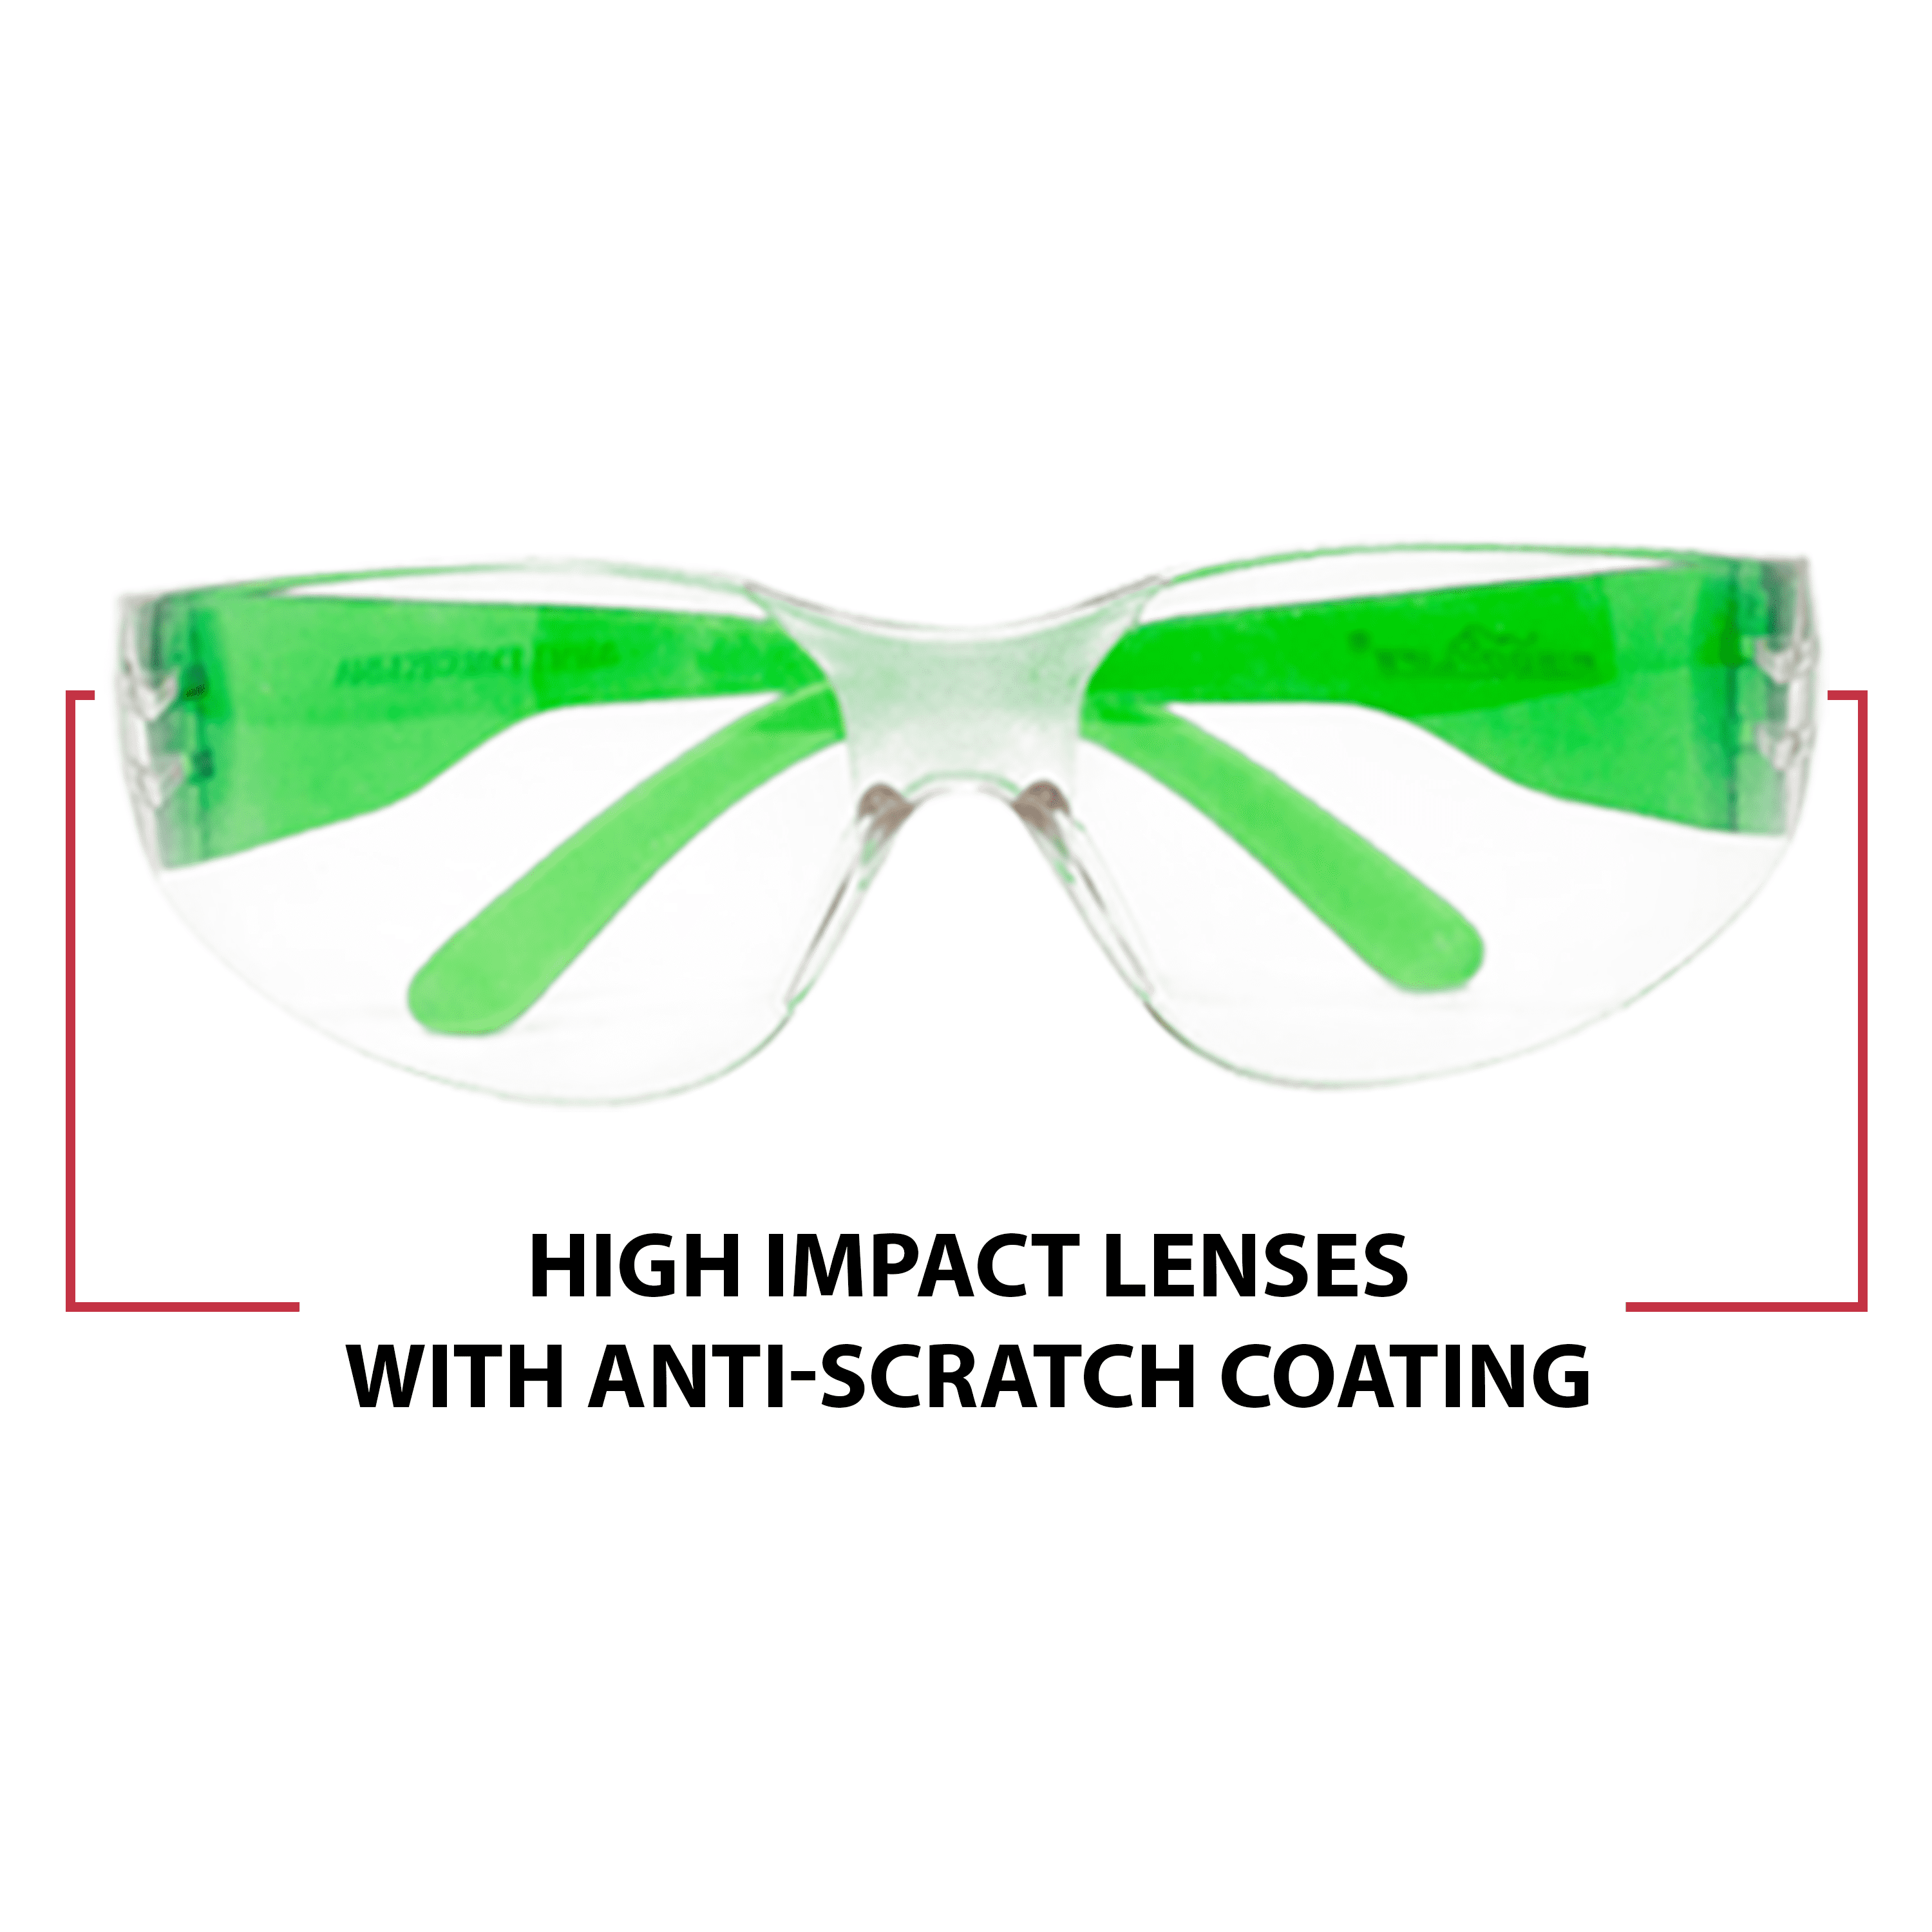 Safe Handler Green, Crystal Clear Lens Color Temple Safety glasses  (36-Pairs) BLSH-ESCR-CLLCT-SG8GR-36 - The Home Depot